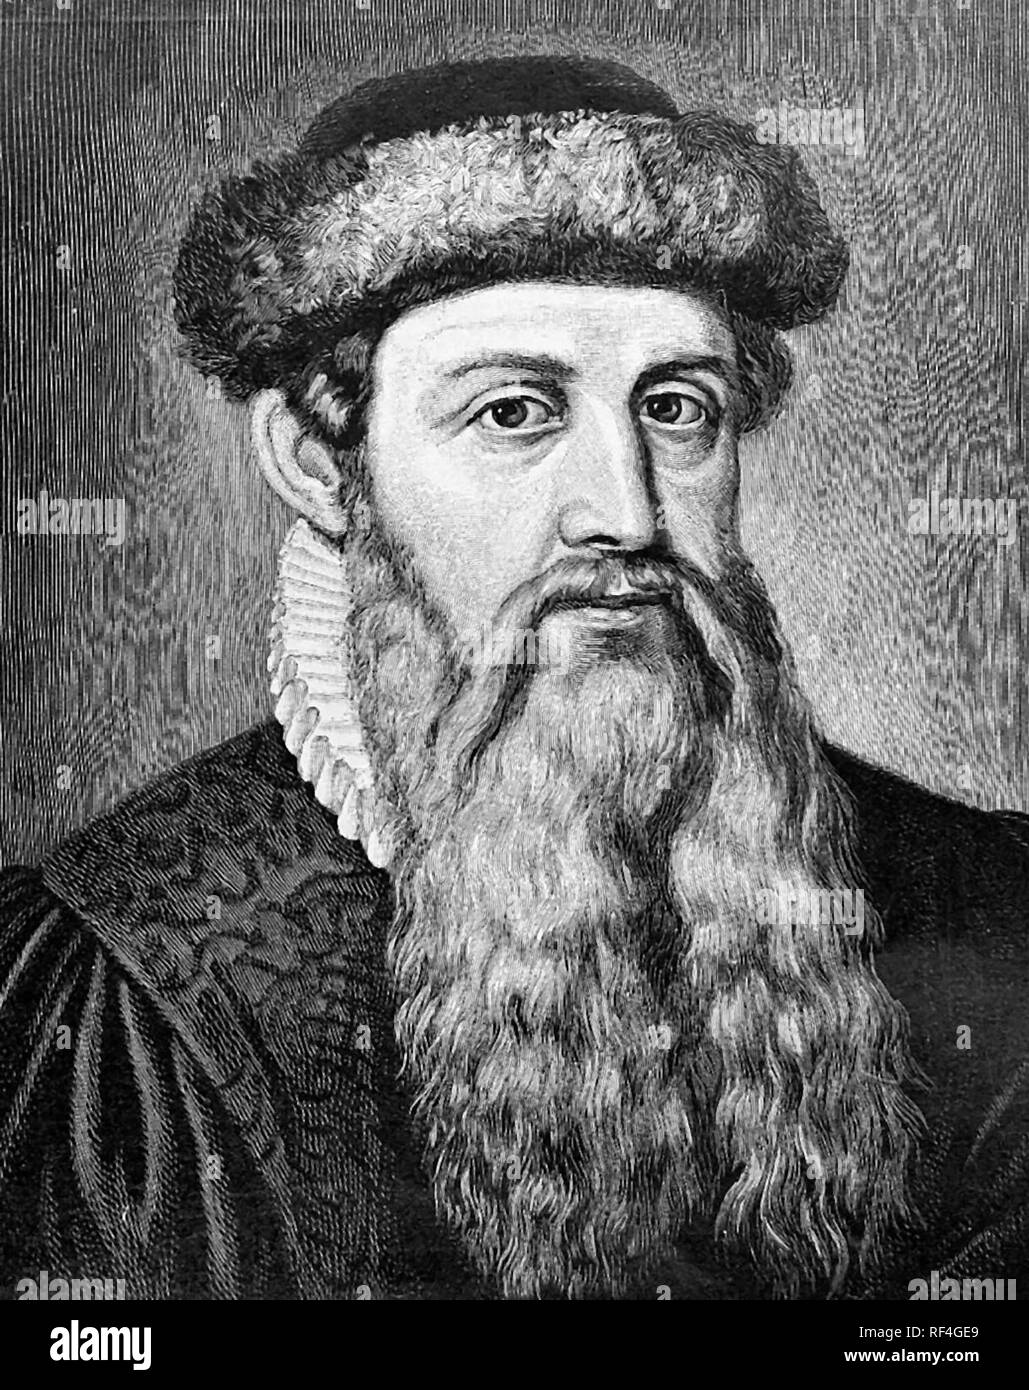 Johannes Gutenberg, a German blacksmith, goldsmith, inventor, printer, and publisher who introduced printing to Europe with the printing press. Stock Photo